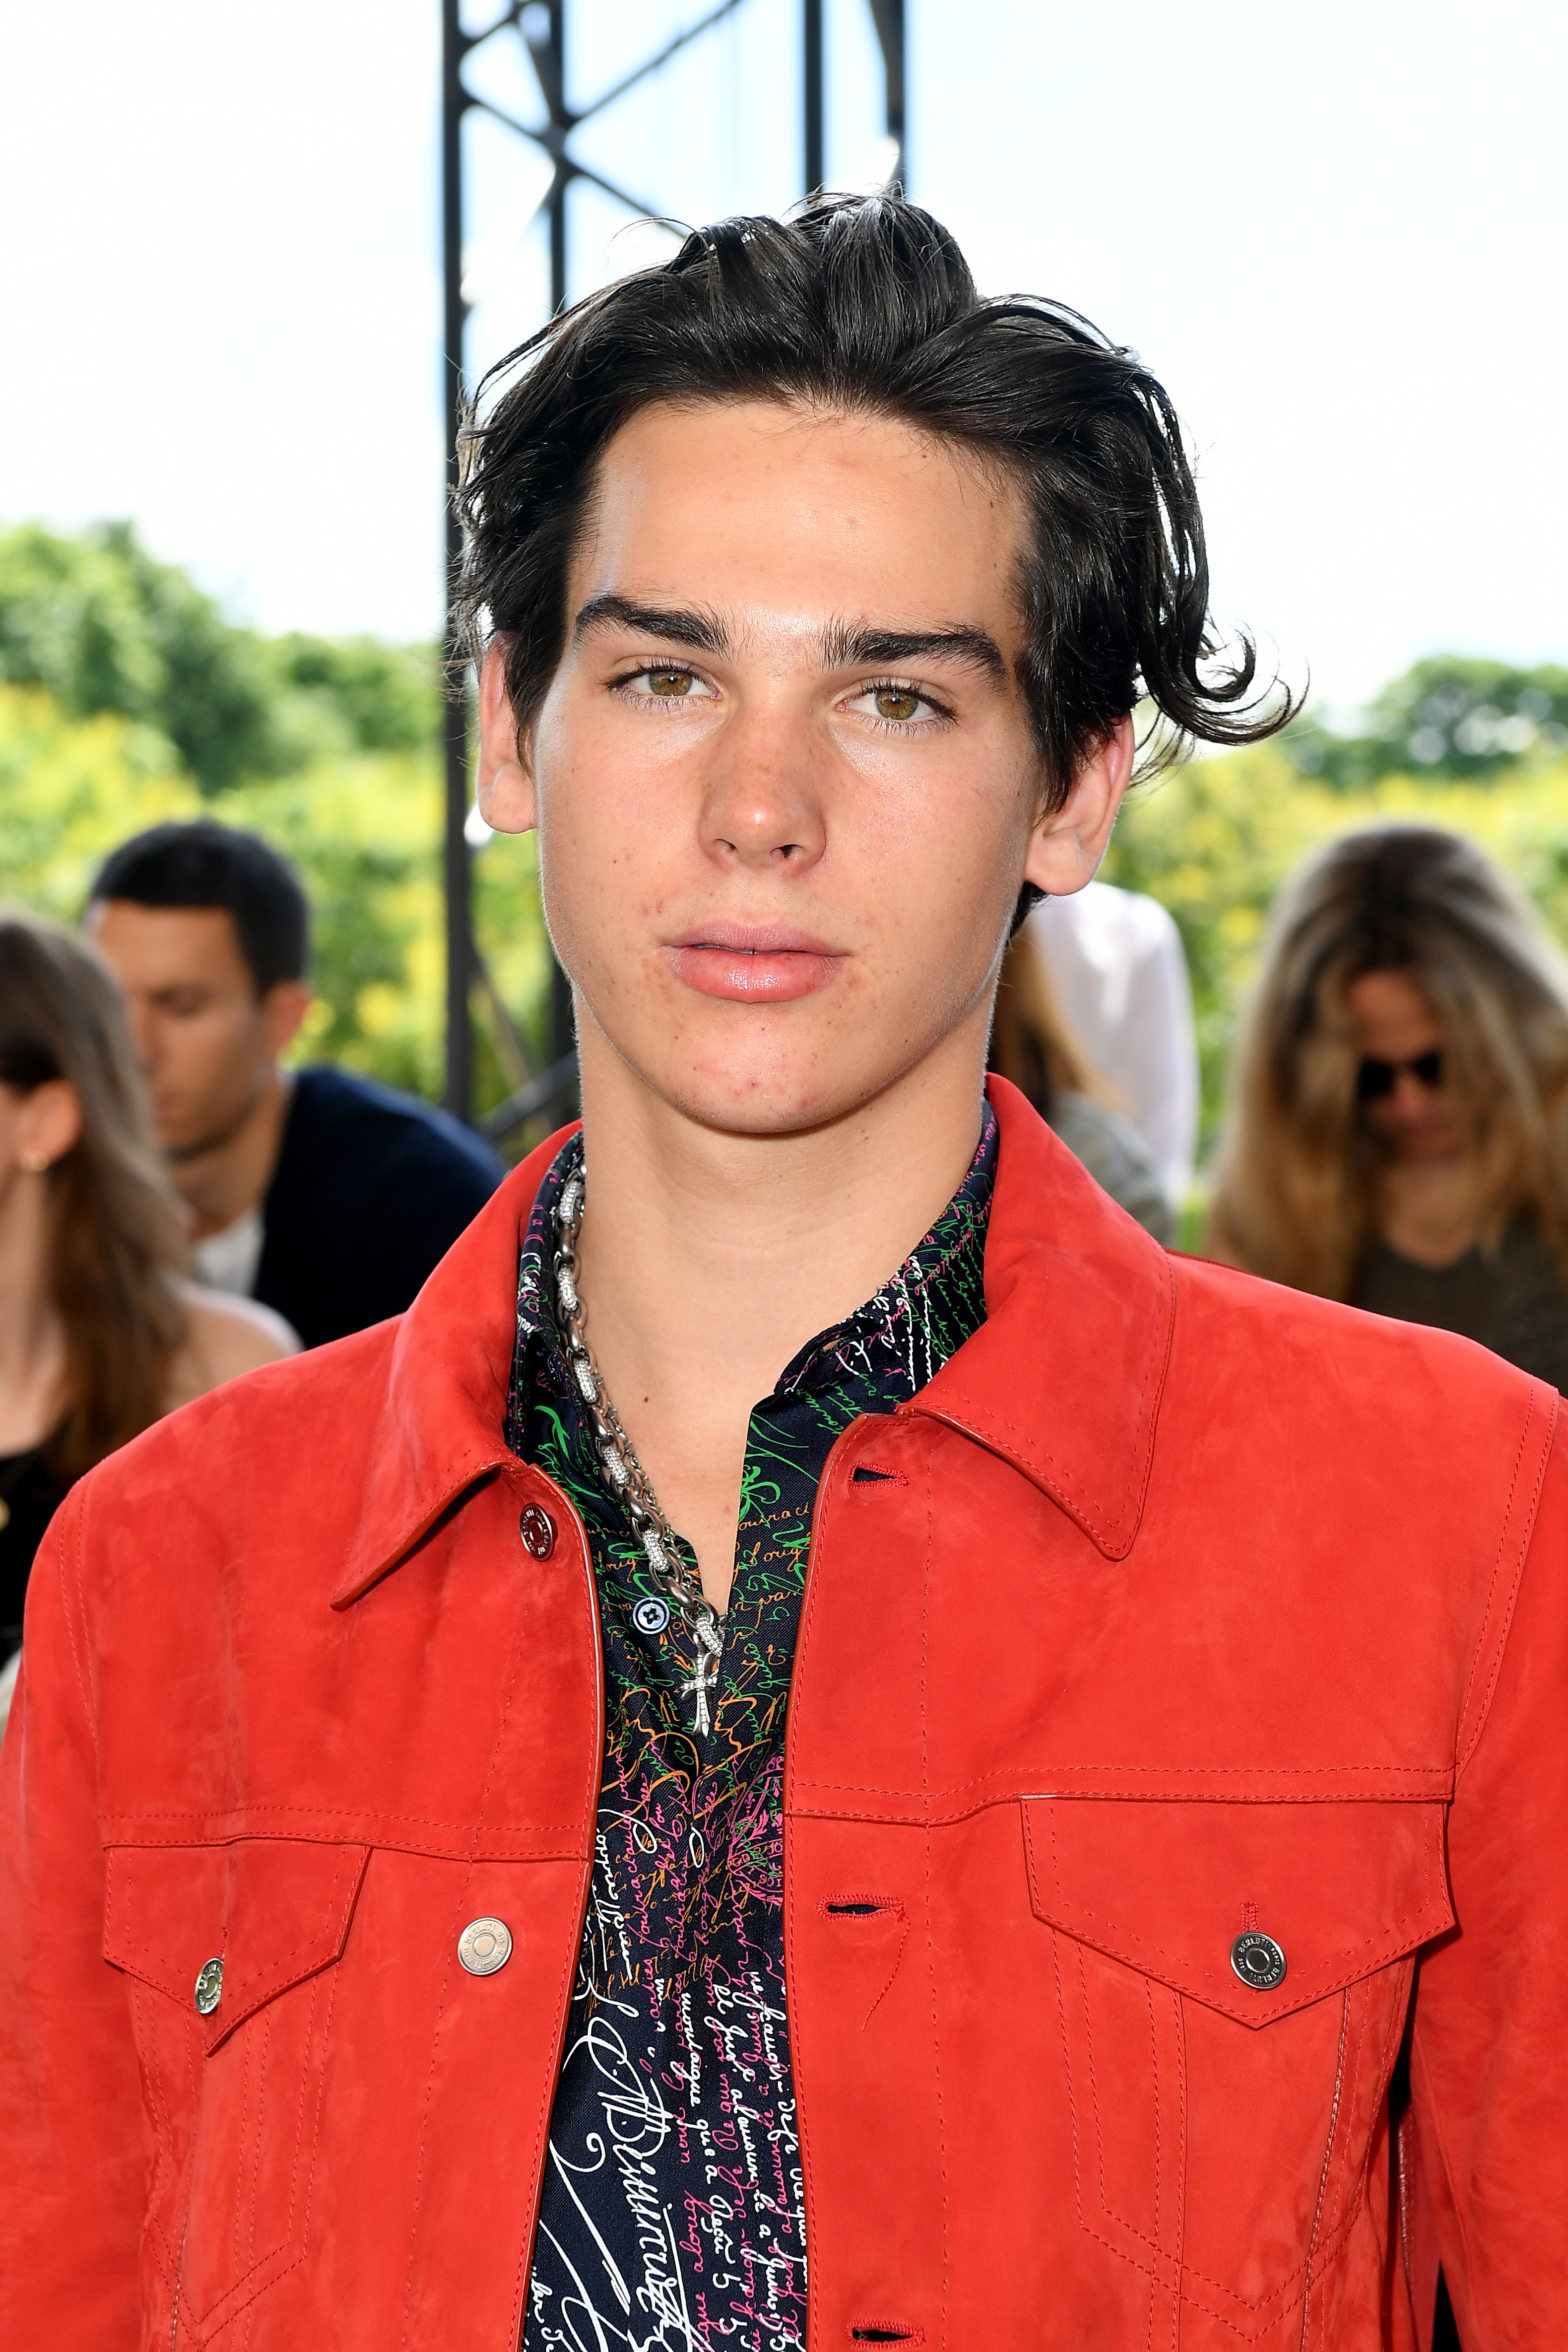 Paris Brosnan attends the Berluti Menswear Spring Summer 2020 show on June 21, 2019 in Paris, France | Source: Getty Images